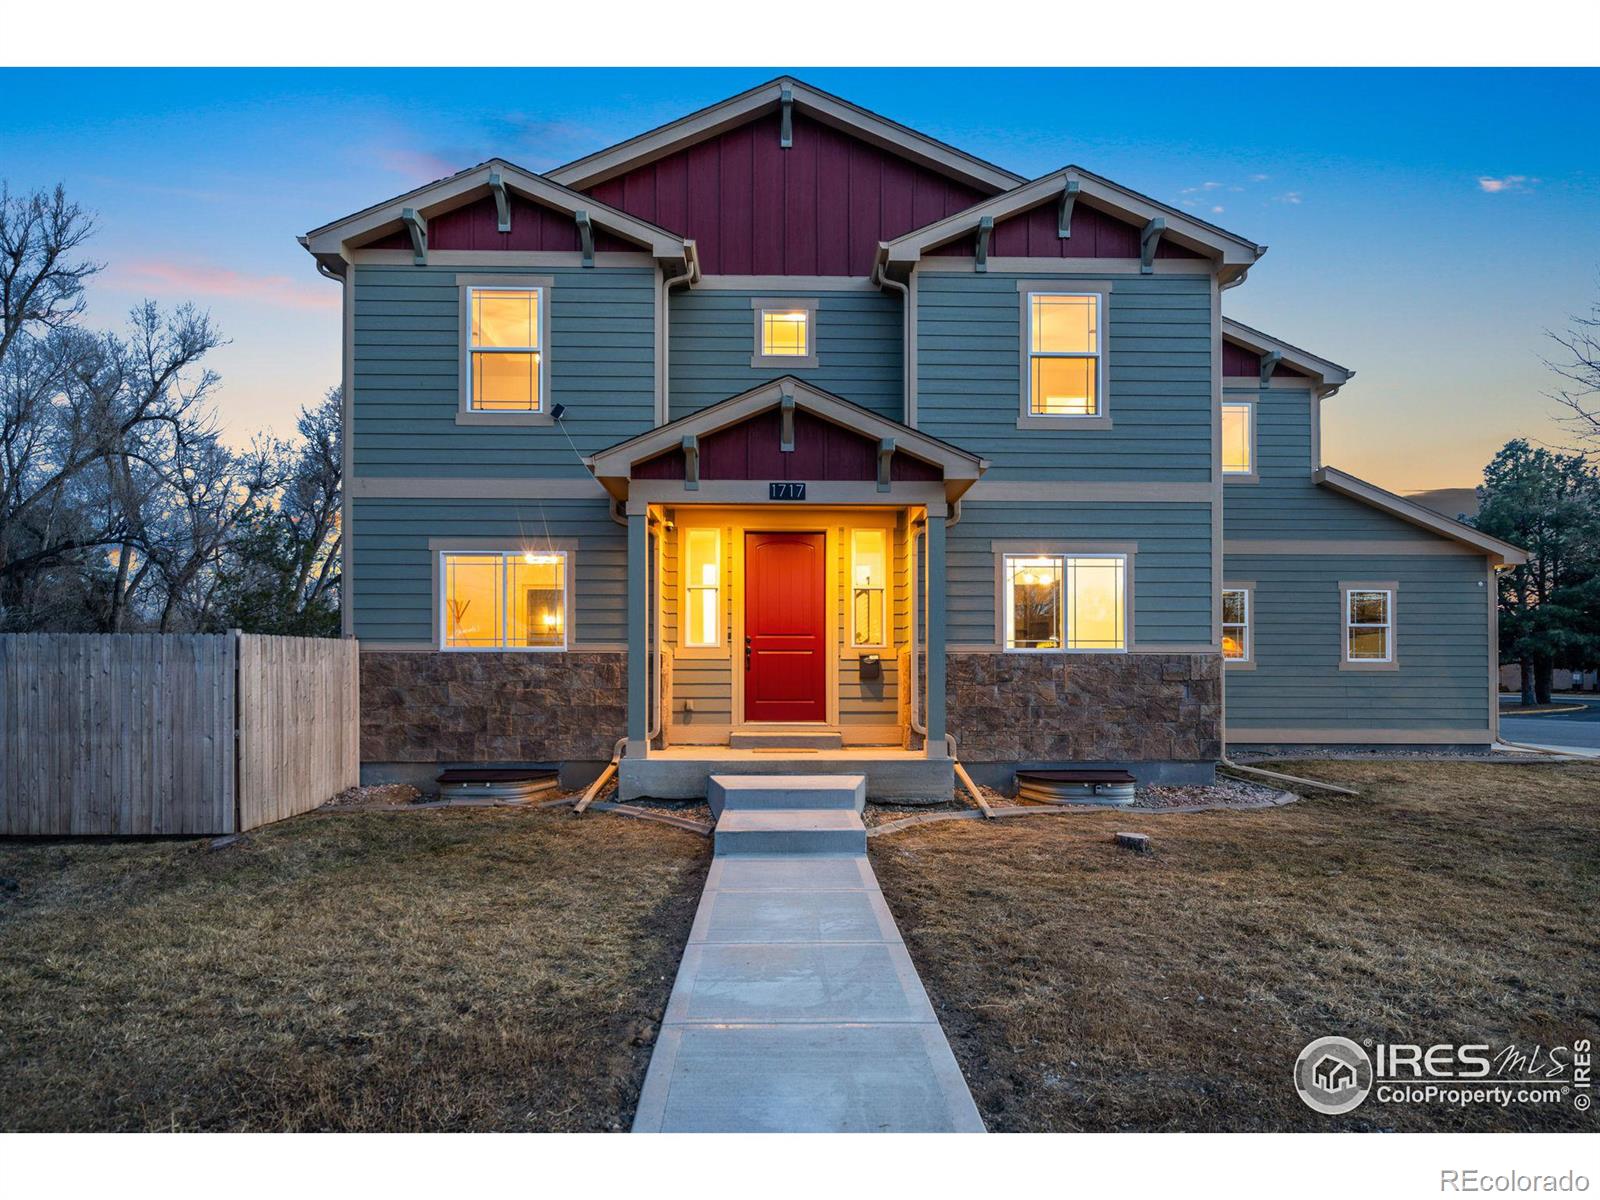 1717 W Mulberry Street, fort collins MLS: 4567891004648 Beds: 9 Baths: 5 Price: $945,000